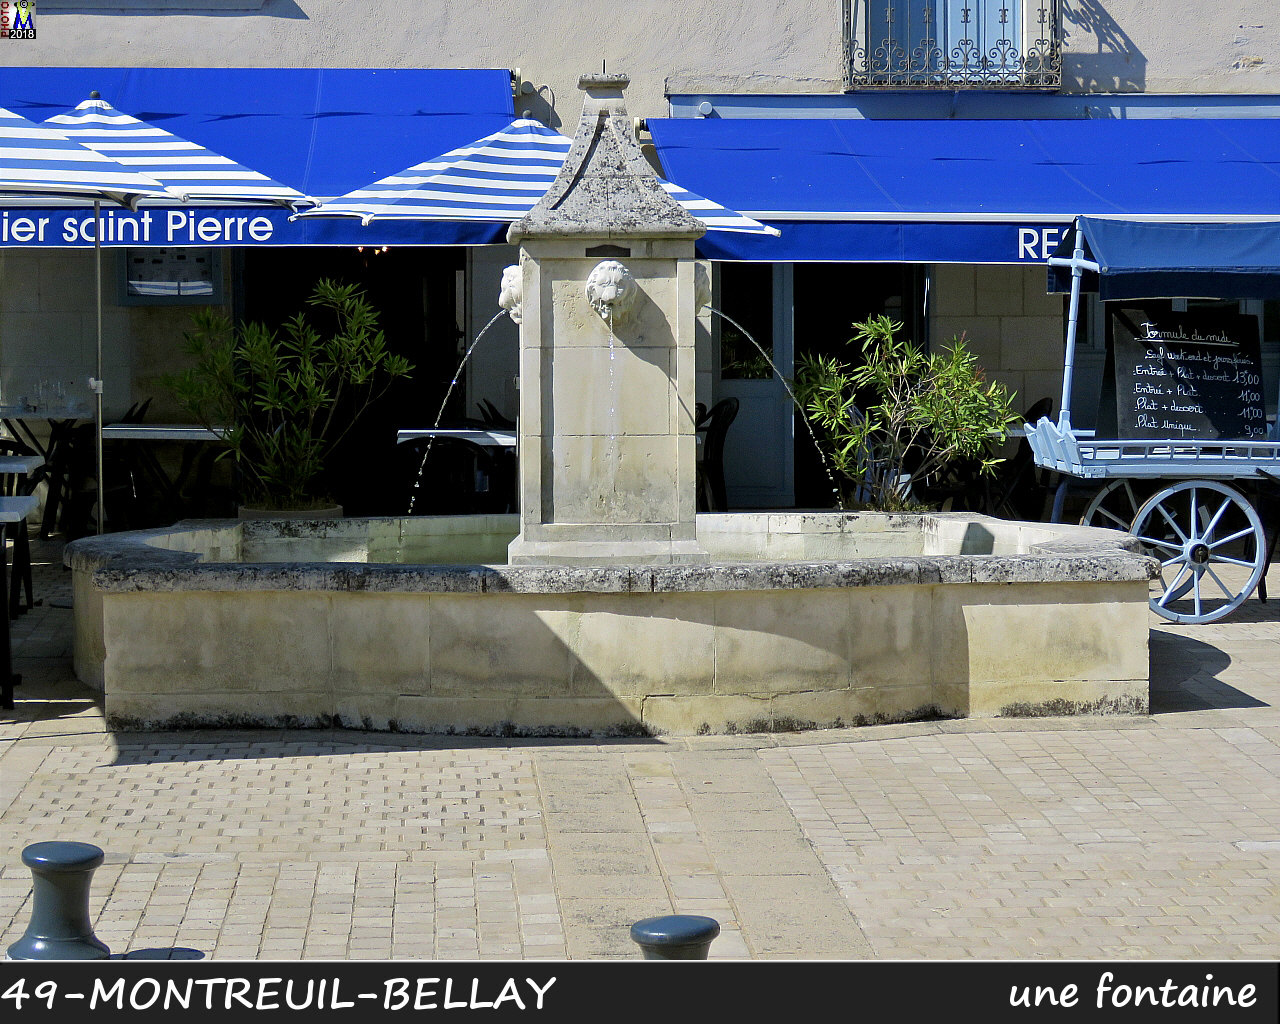 49MONTREUIL-BELLAY_fontaine_1000.jpg